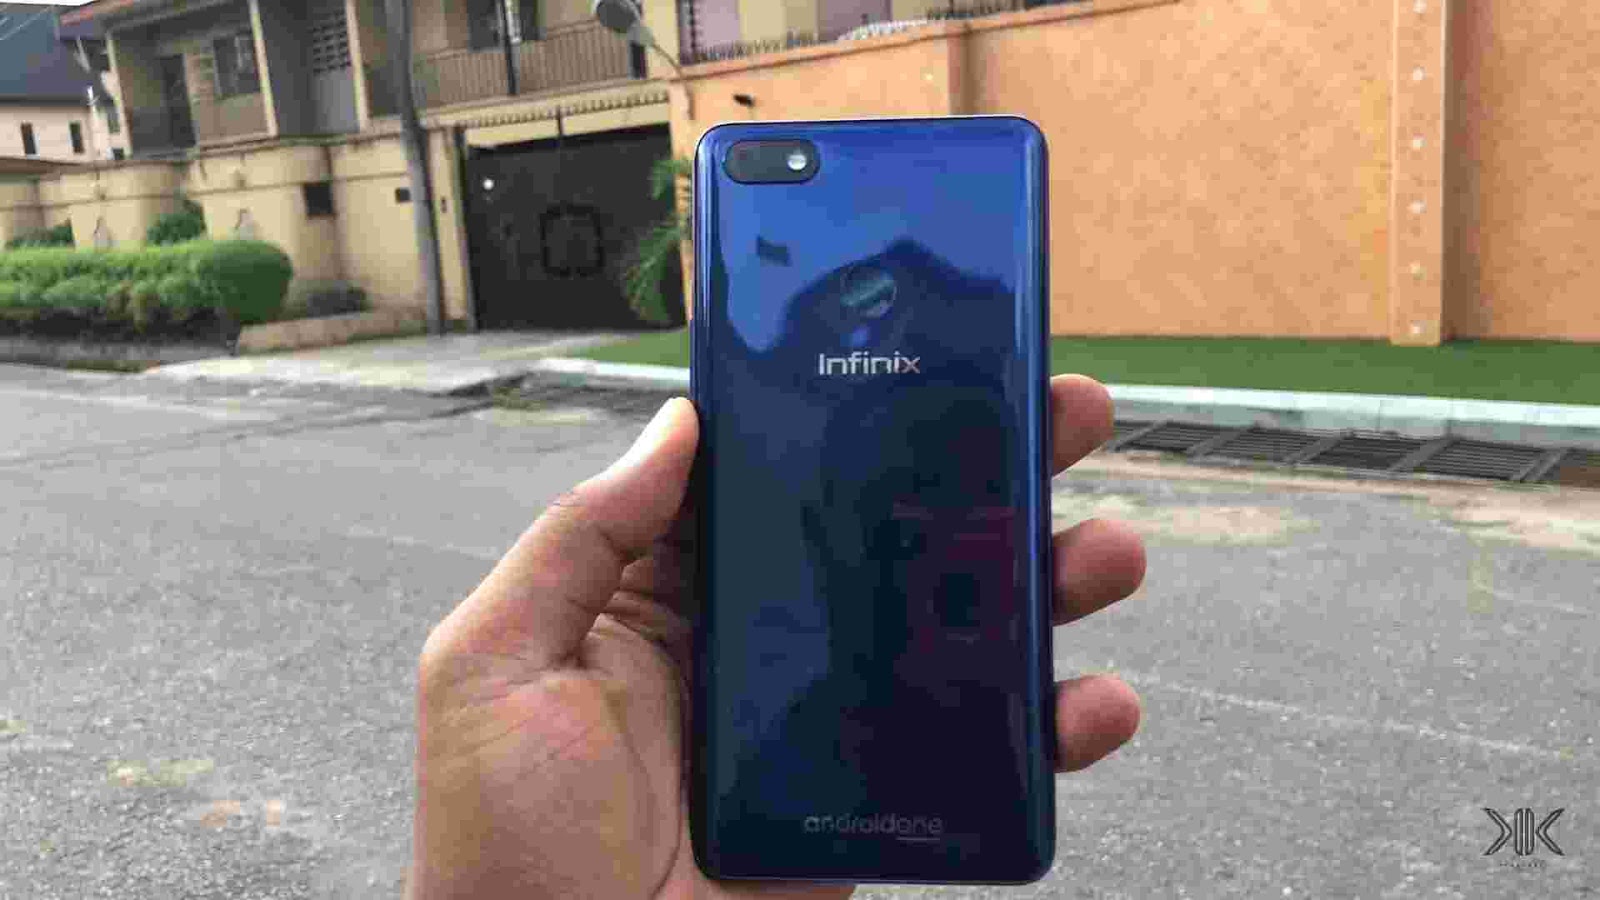 The back of the Infinix Note 5